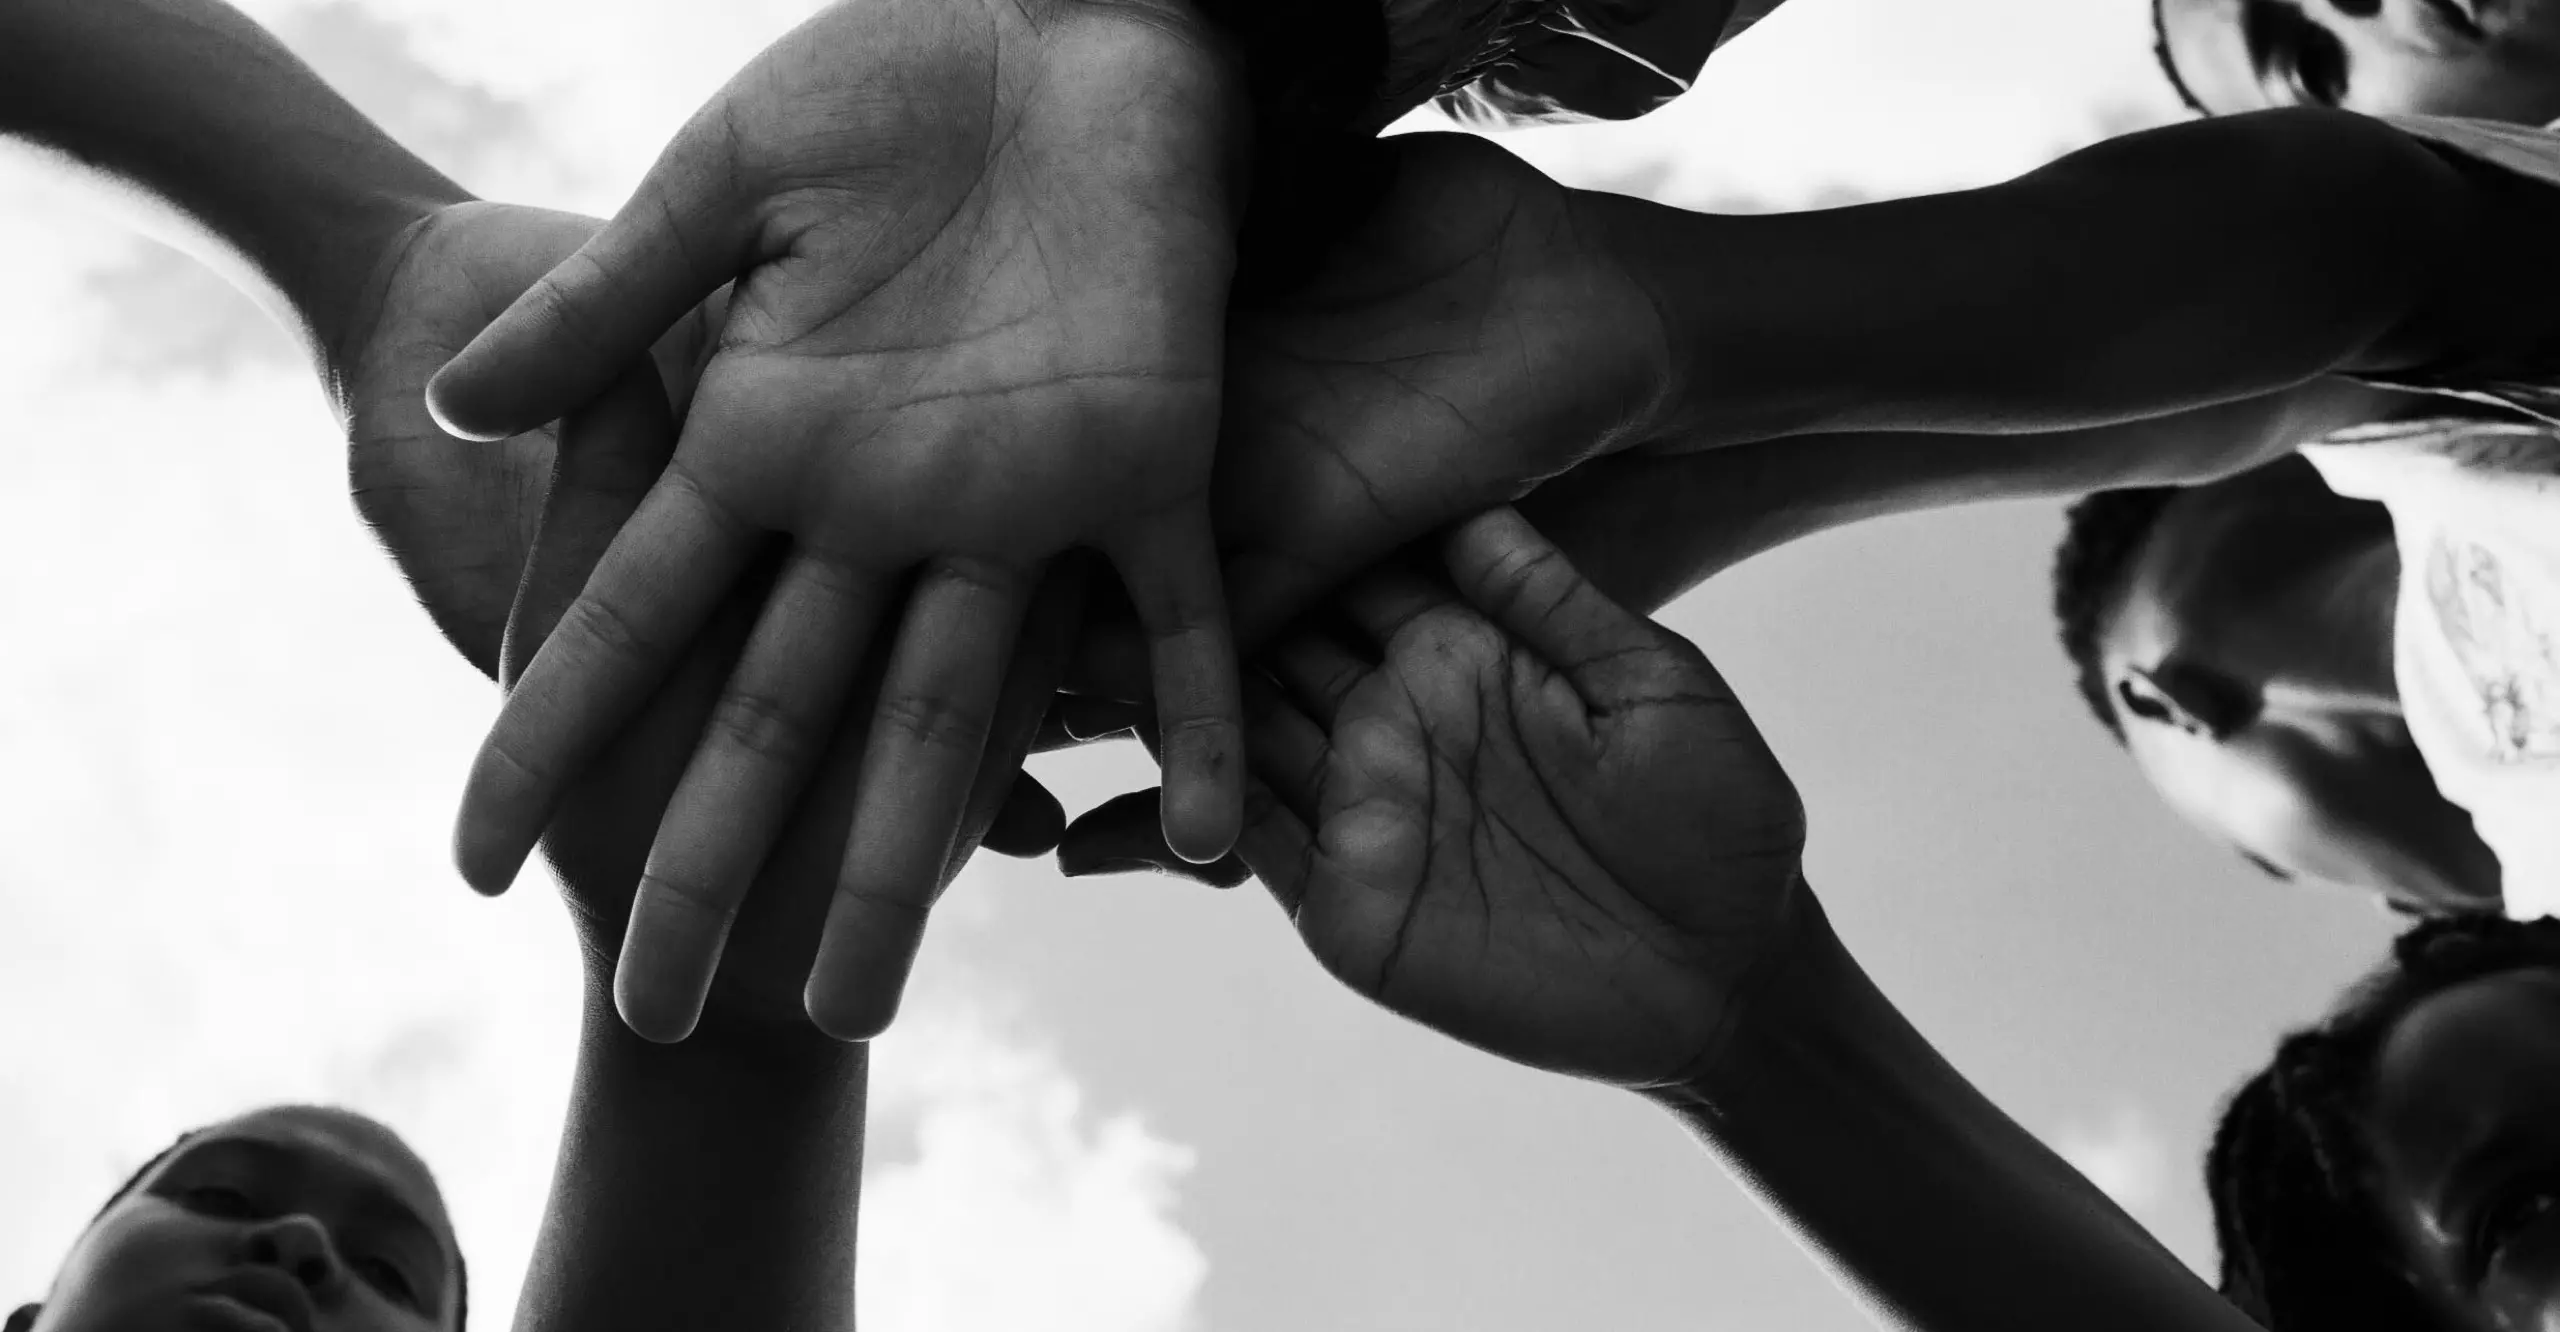 Black and white image taken from below of a group of four children with their hands in the middle, palms facing the camera